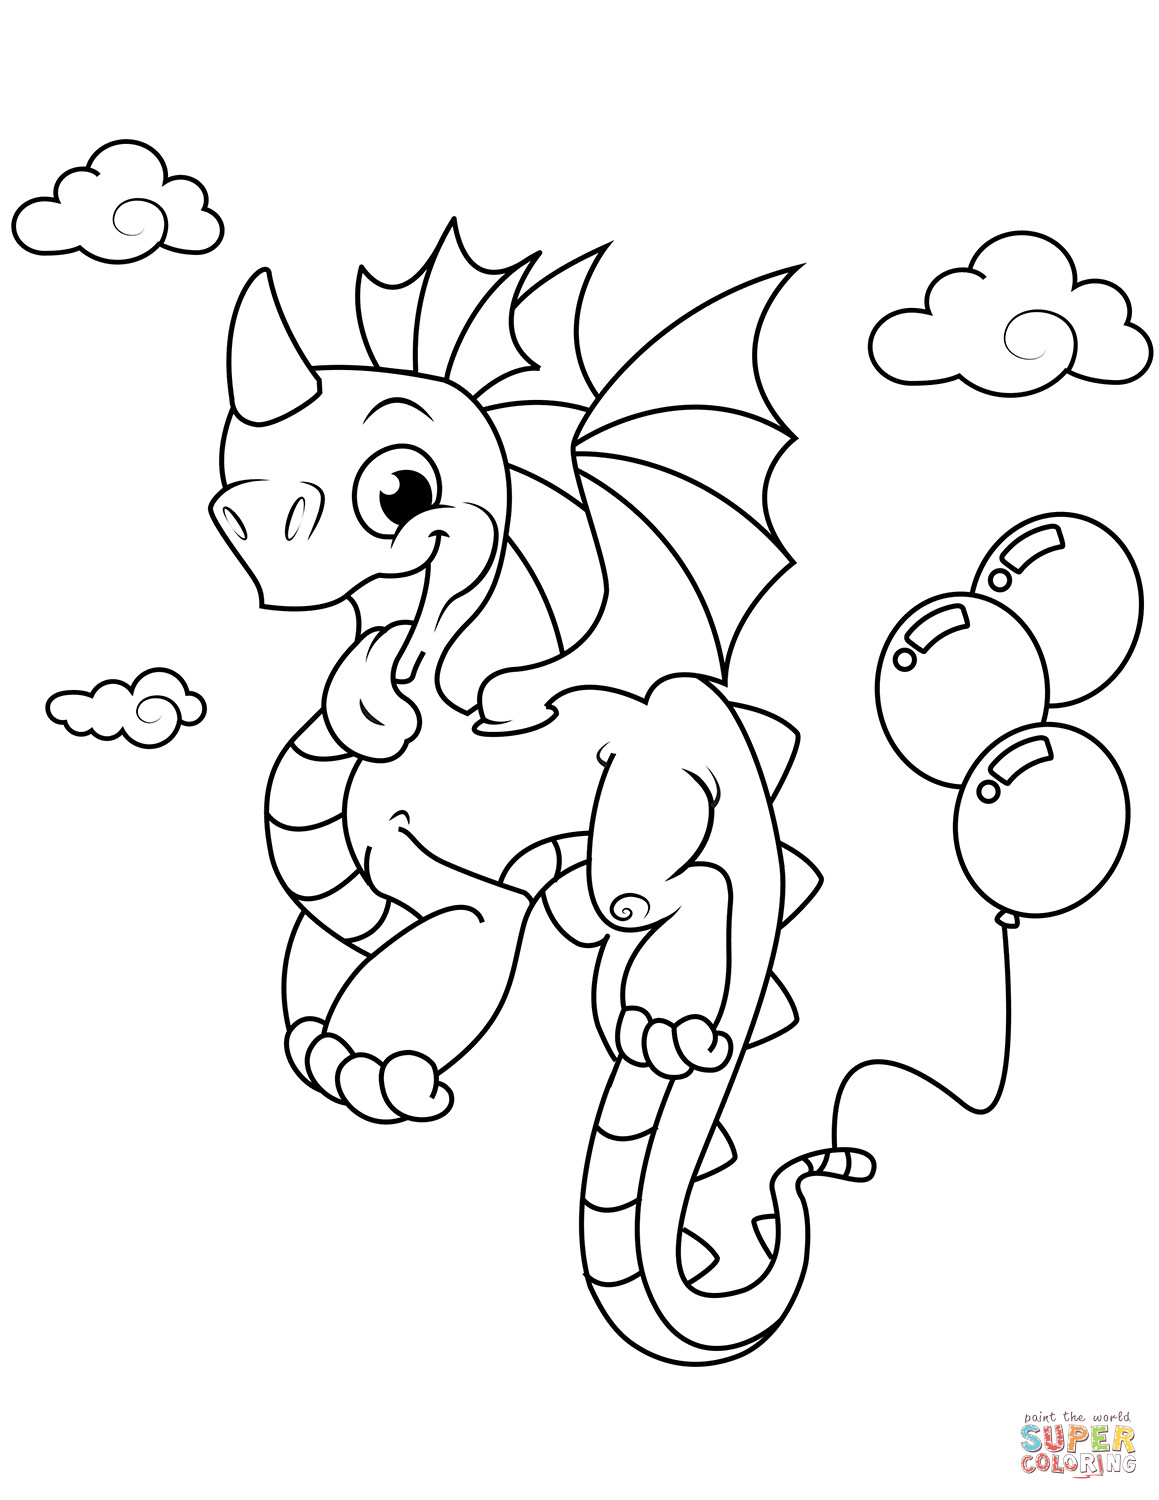 Dragon Coloring Pages Free Printable
 Cute Dragon with Balloons coloring page